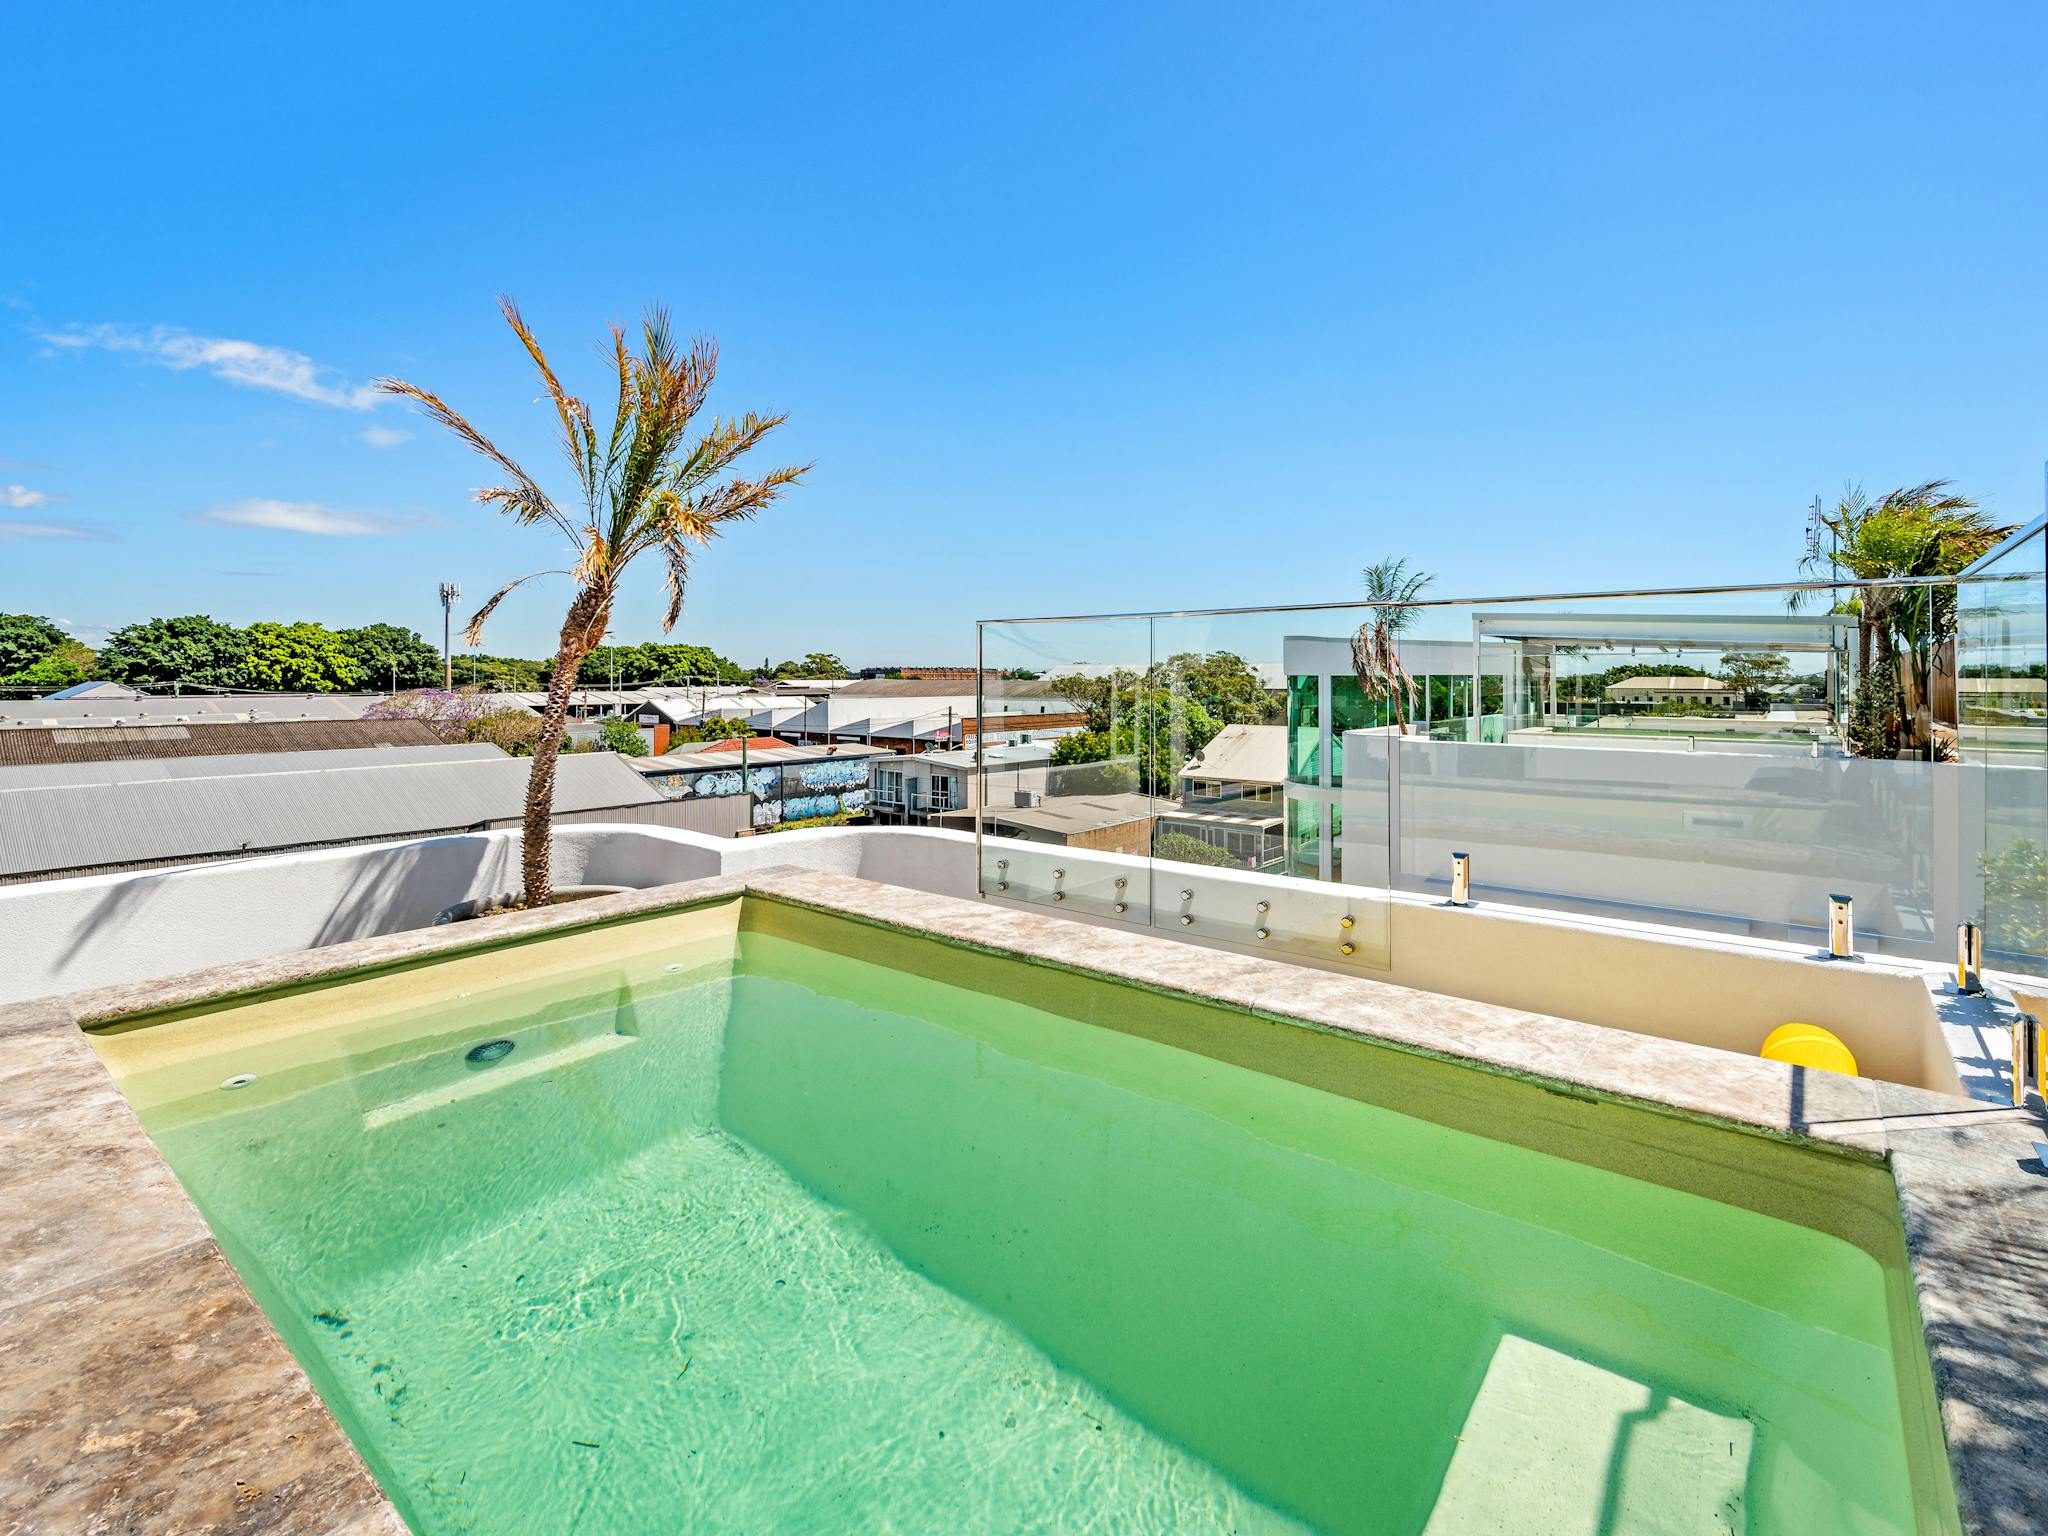 Cool off on a hot day with a swim on the rooftop entertaining area